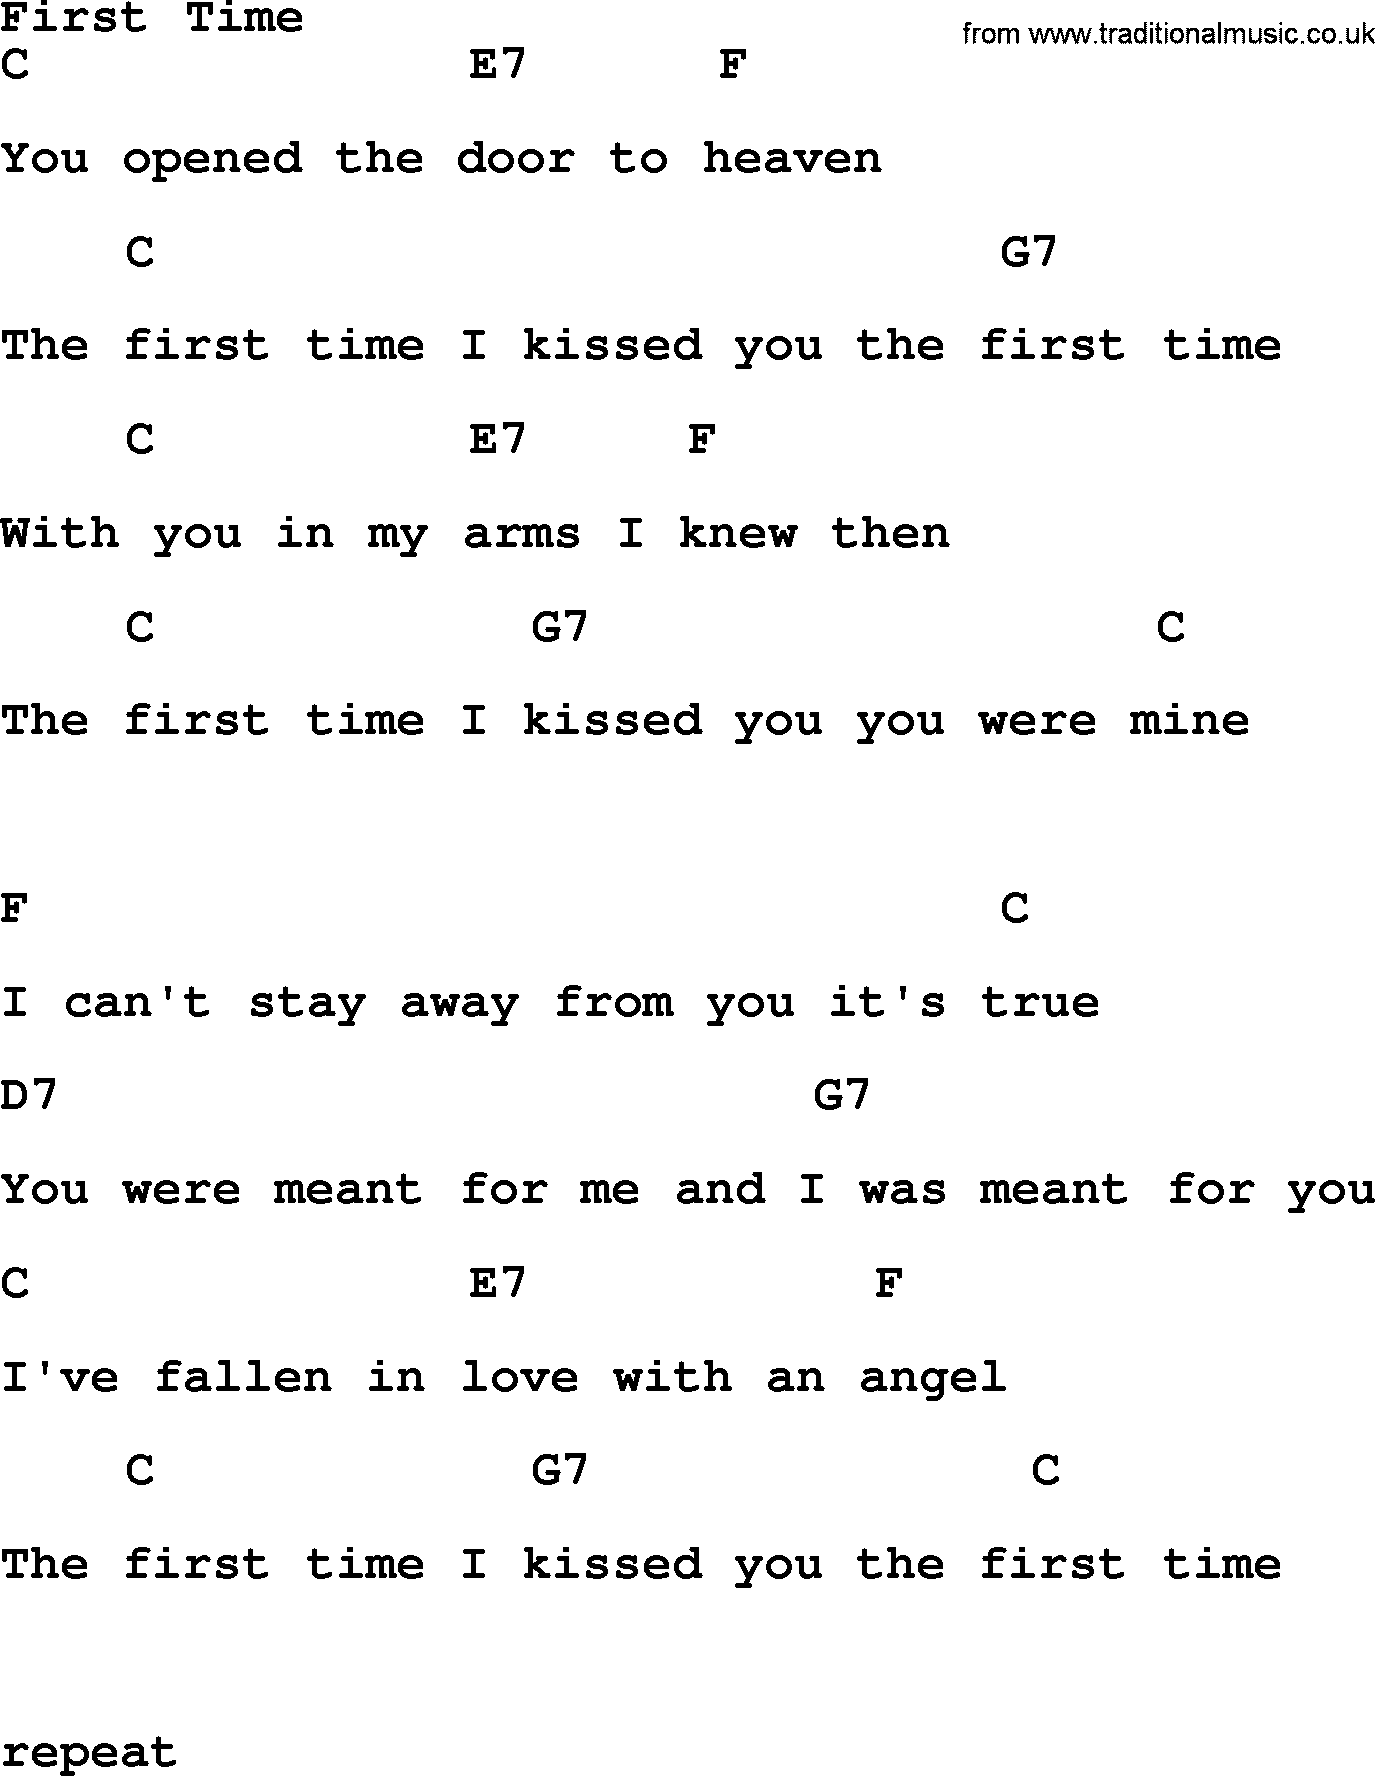 Bluegrass song: First Time, lyrics and chords